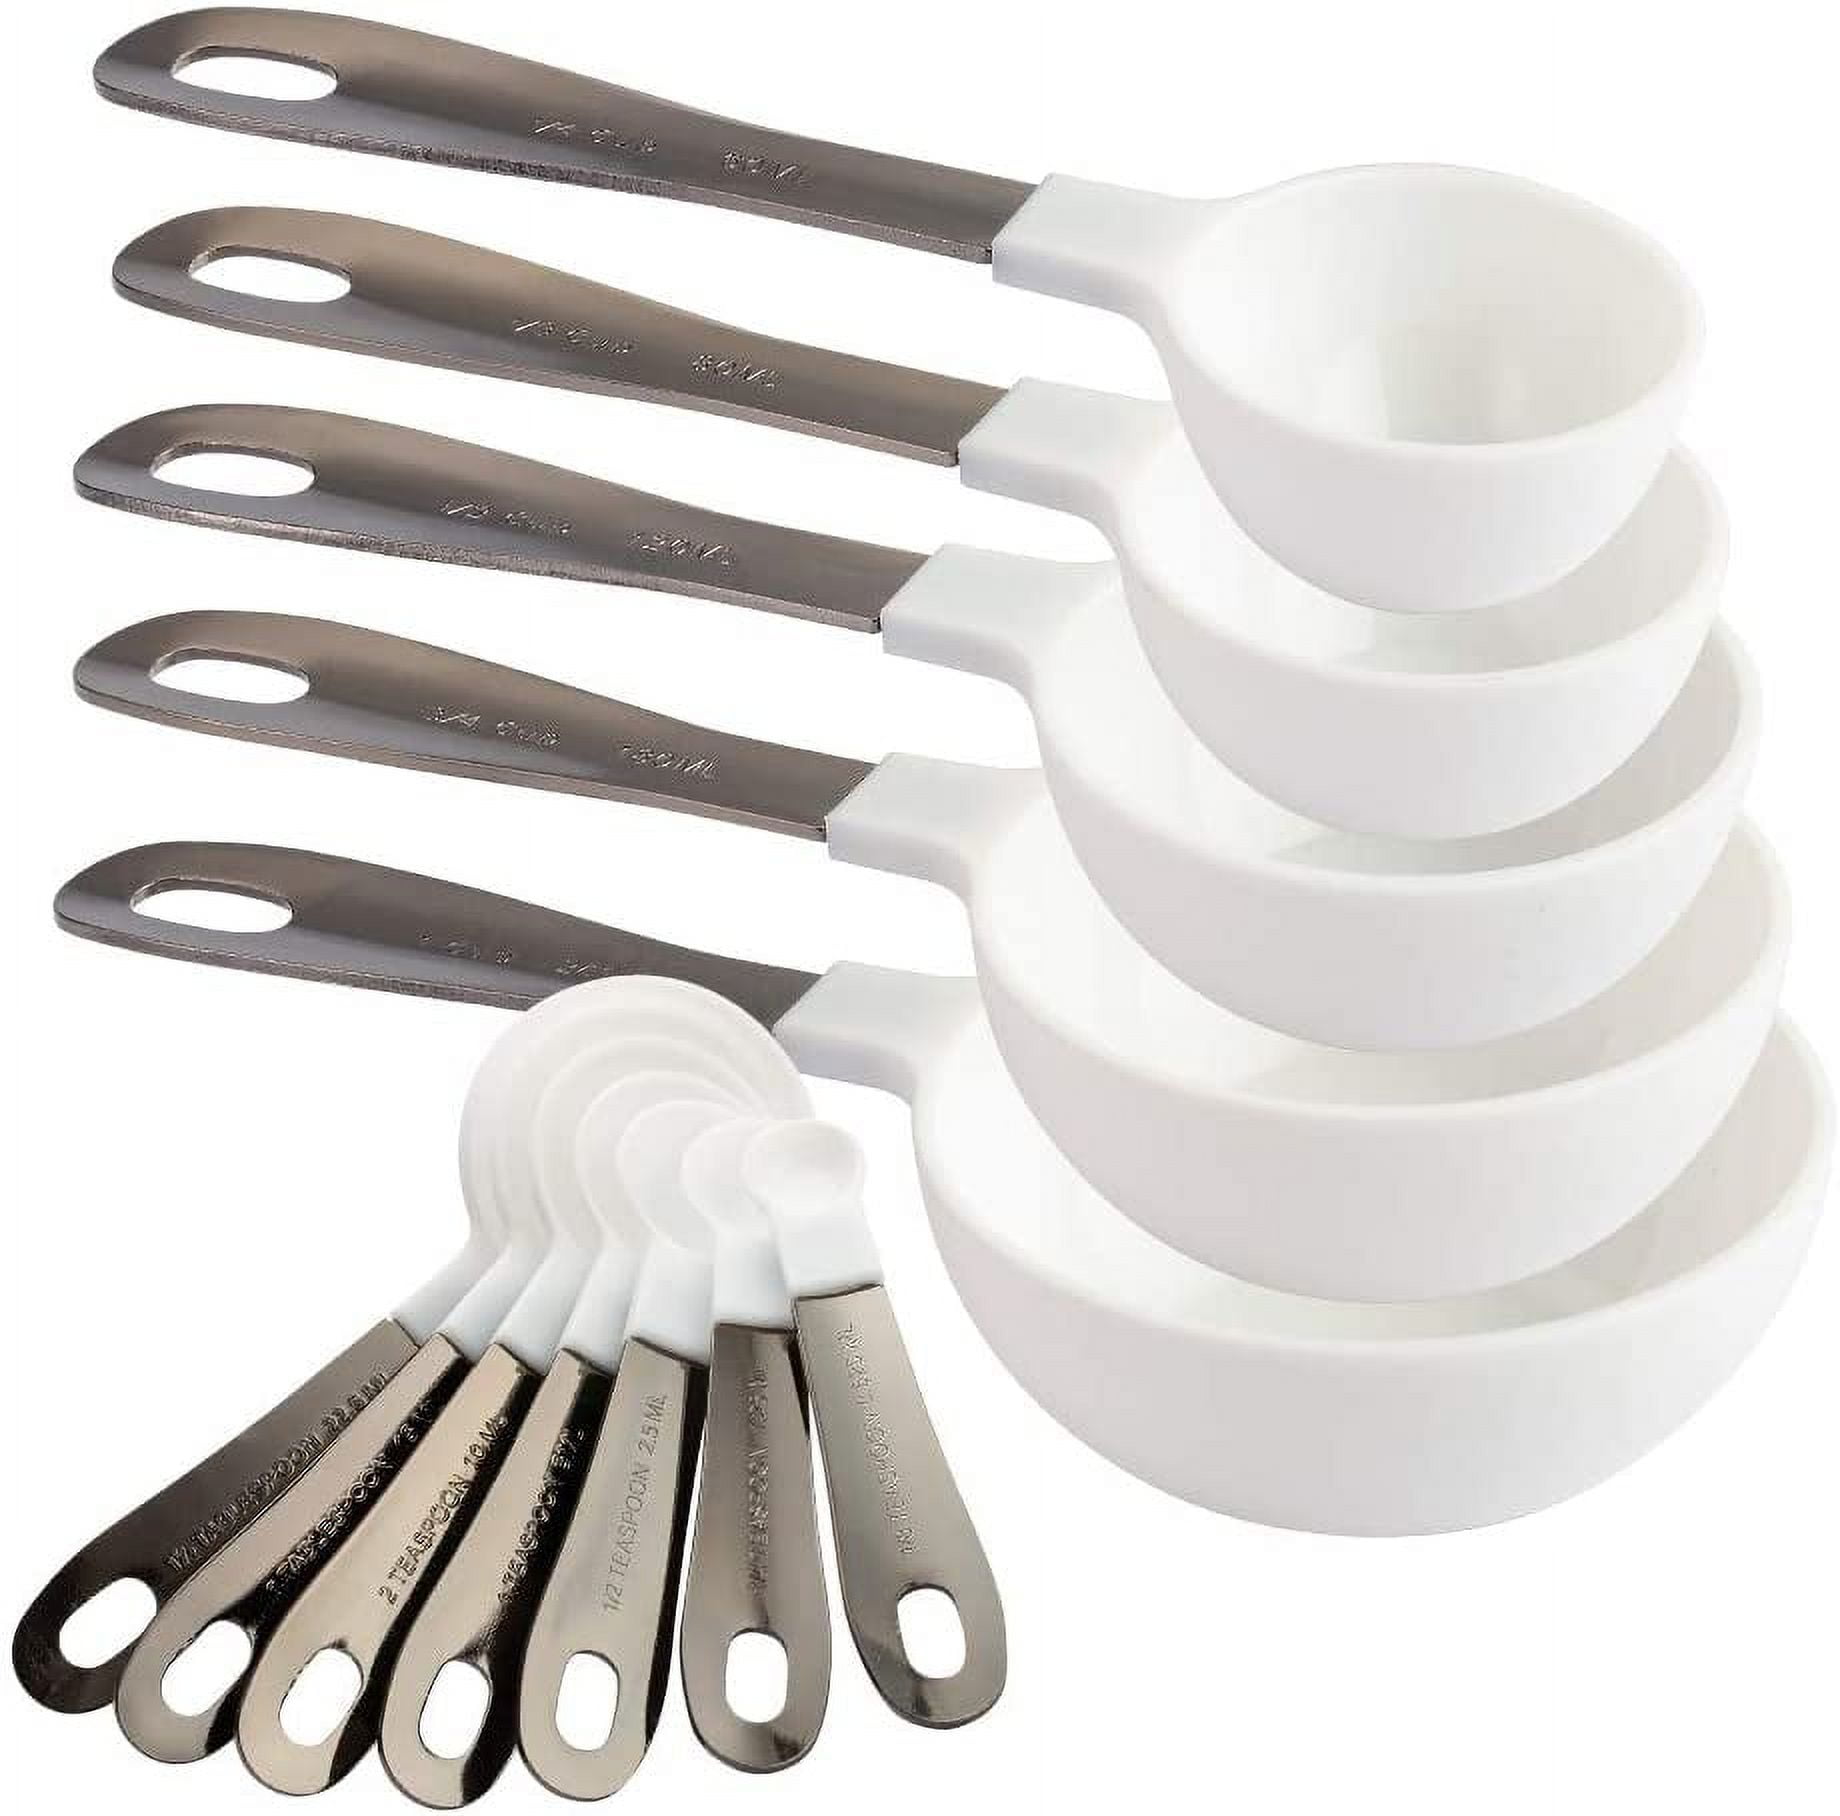 Country Kitchen 12 PC Measuring Cups Set and Measuring Spoon Set/Gunmetal  Stainless Steel Handles/Nesting Kitchen Measuring Set/Liquid Measuring Cup